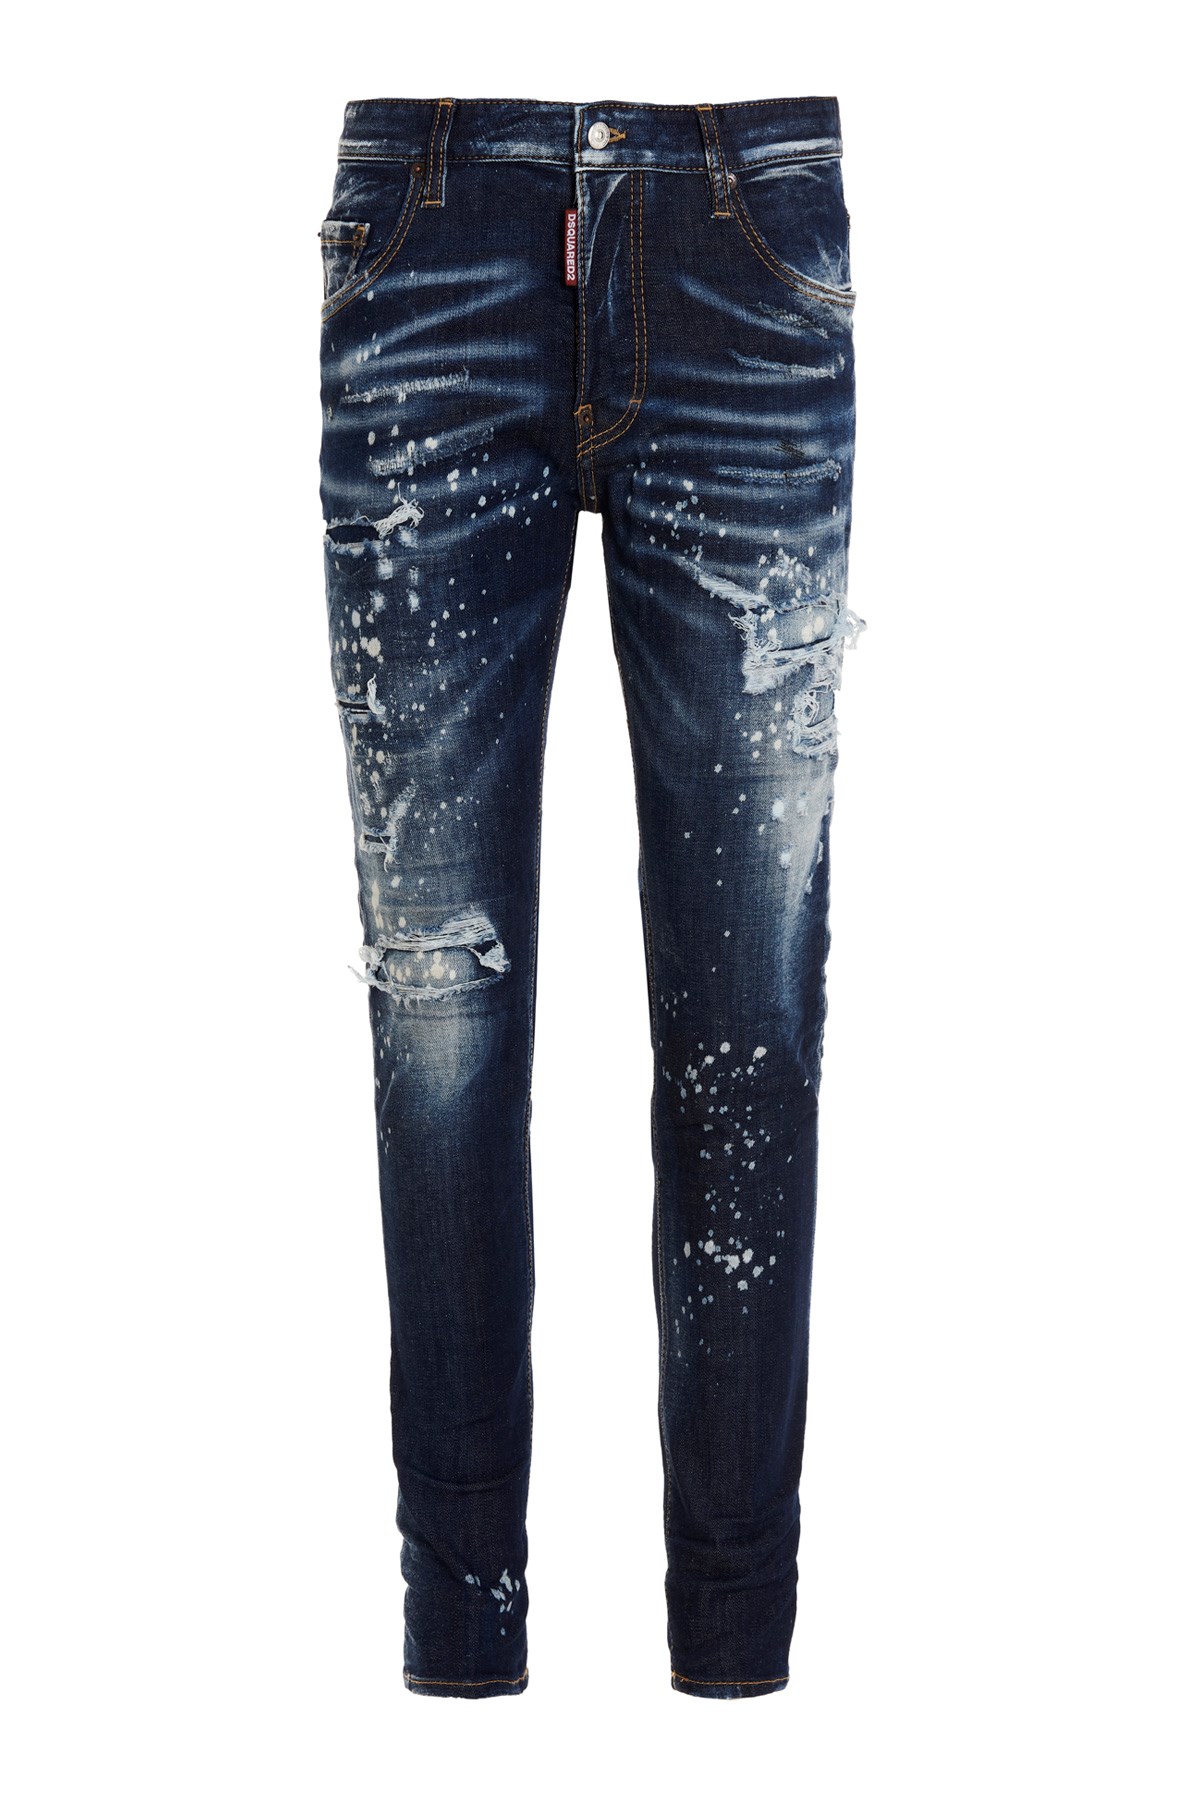 DSQUARED2 ‘Super Twinky’ Jeans